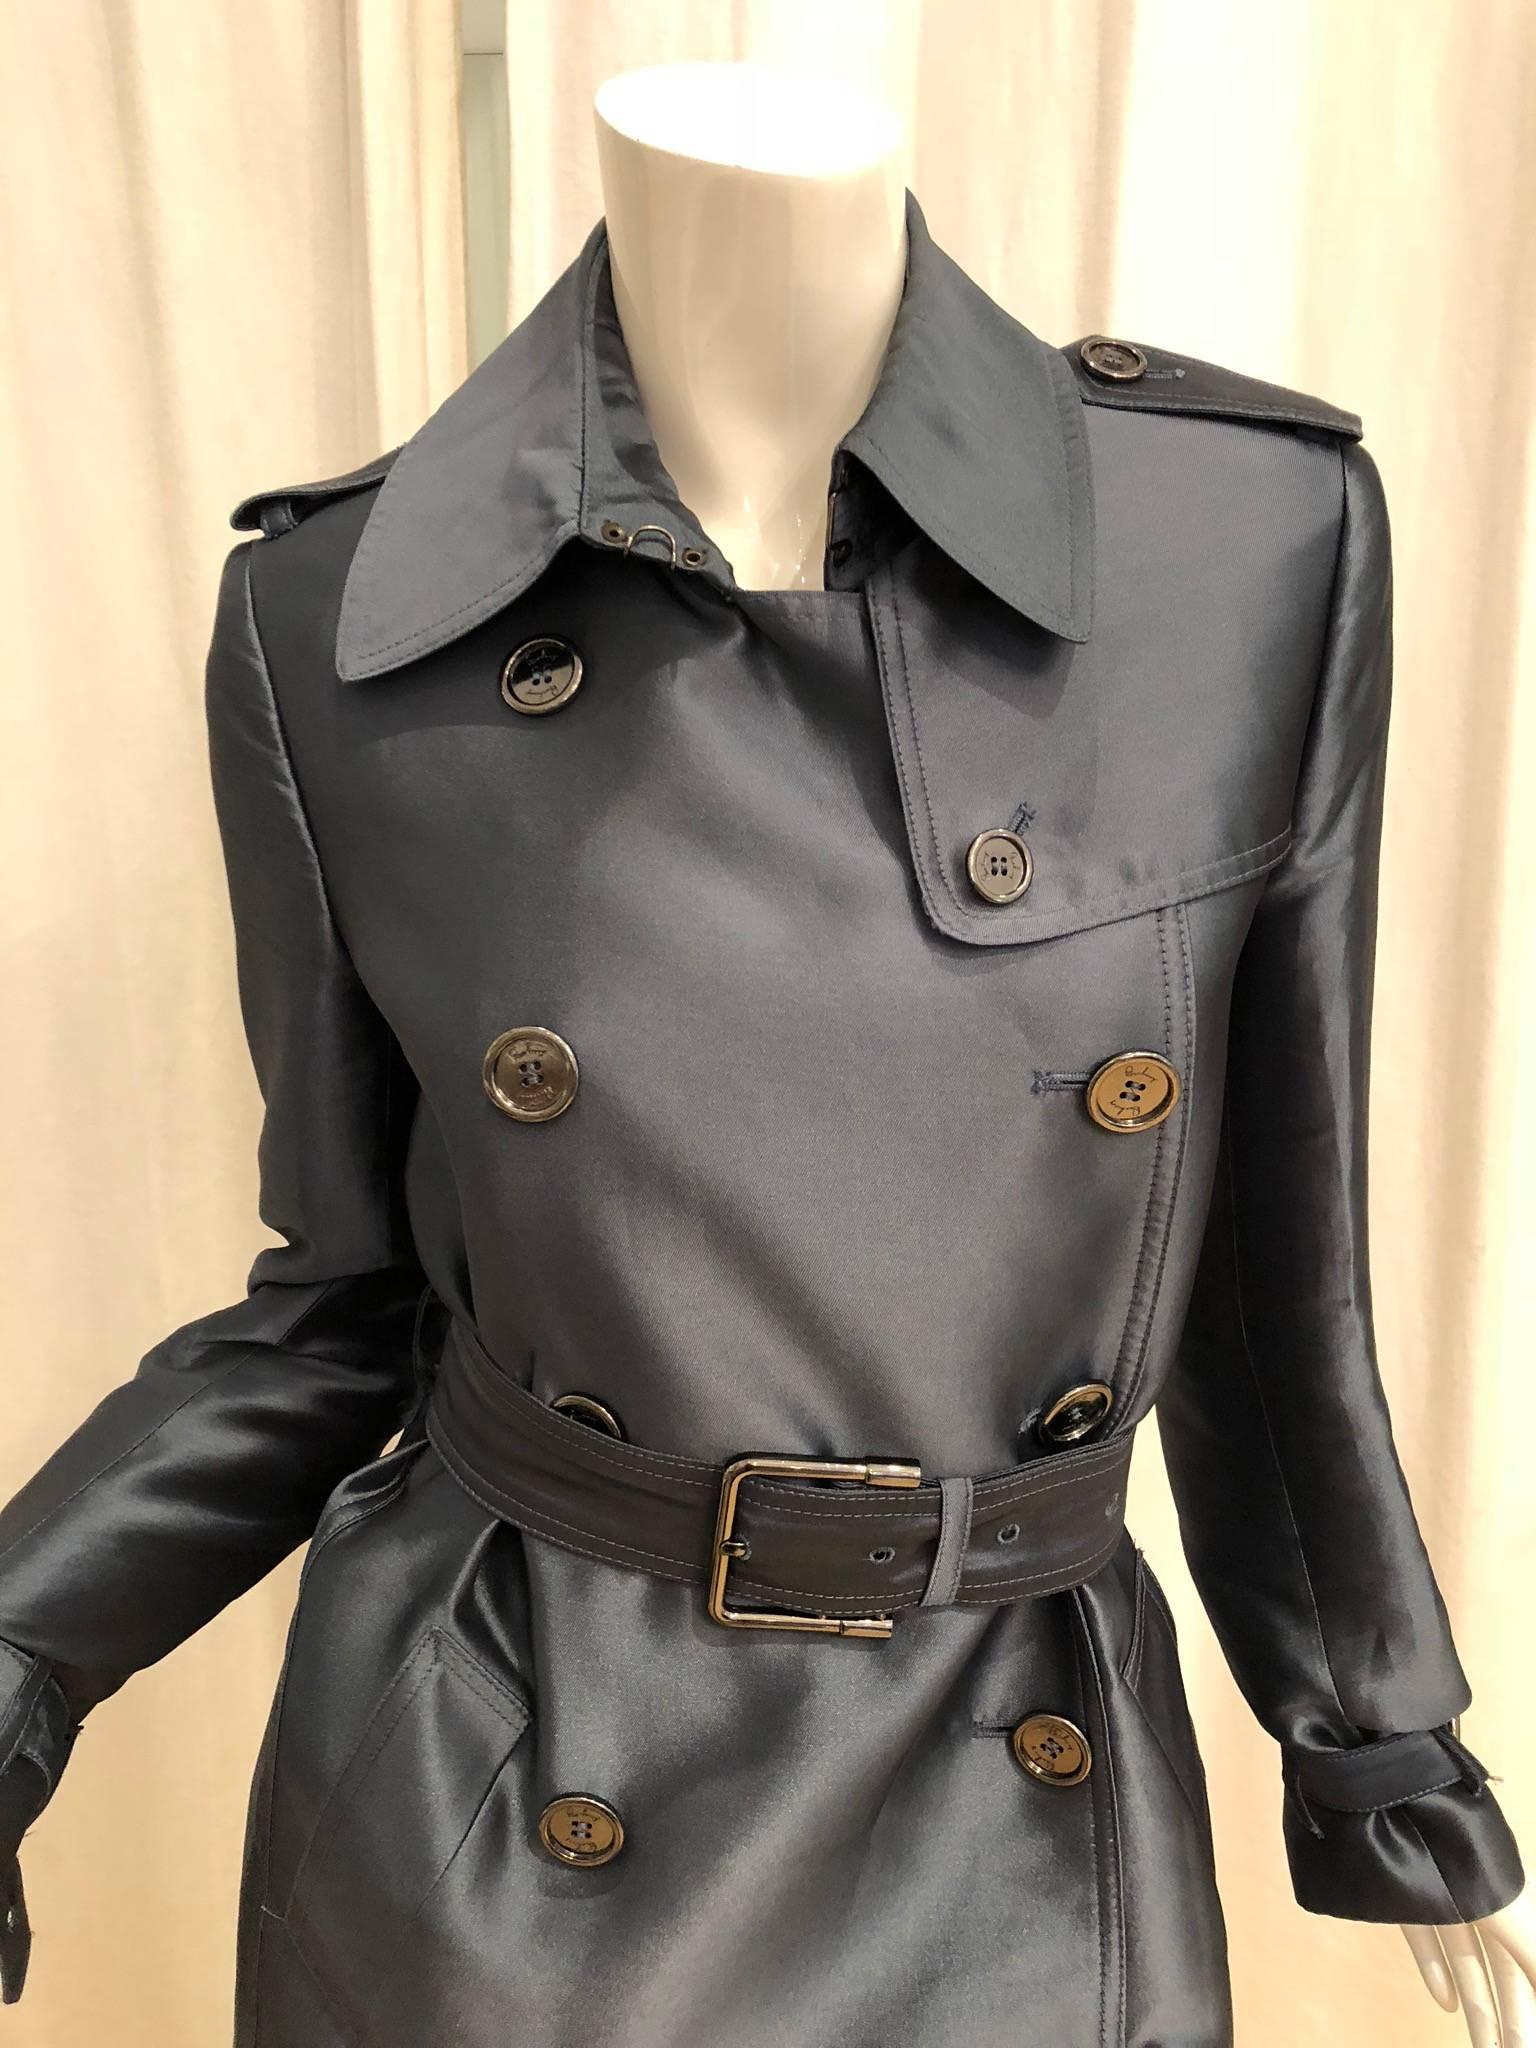 Burberry Double Breasted Short Trench Coat with Gun Metal Buttons and a Slim Fit.